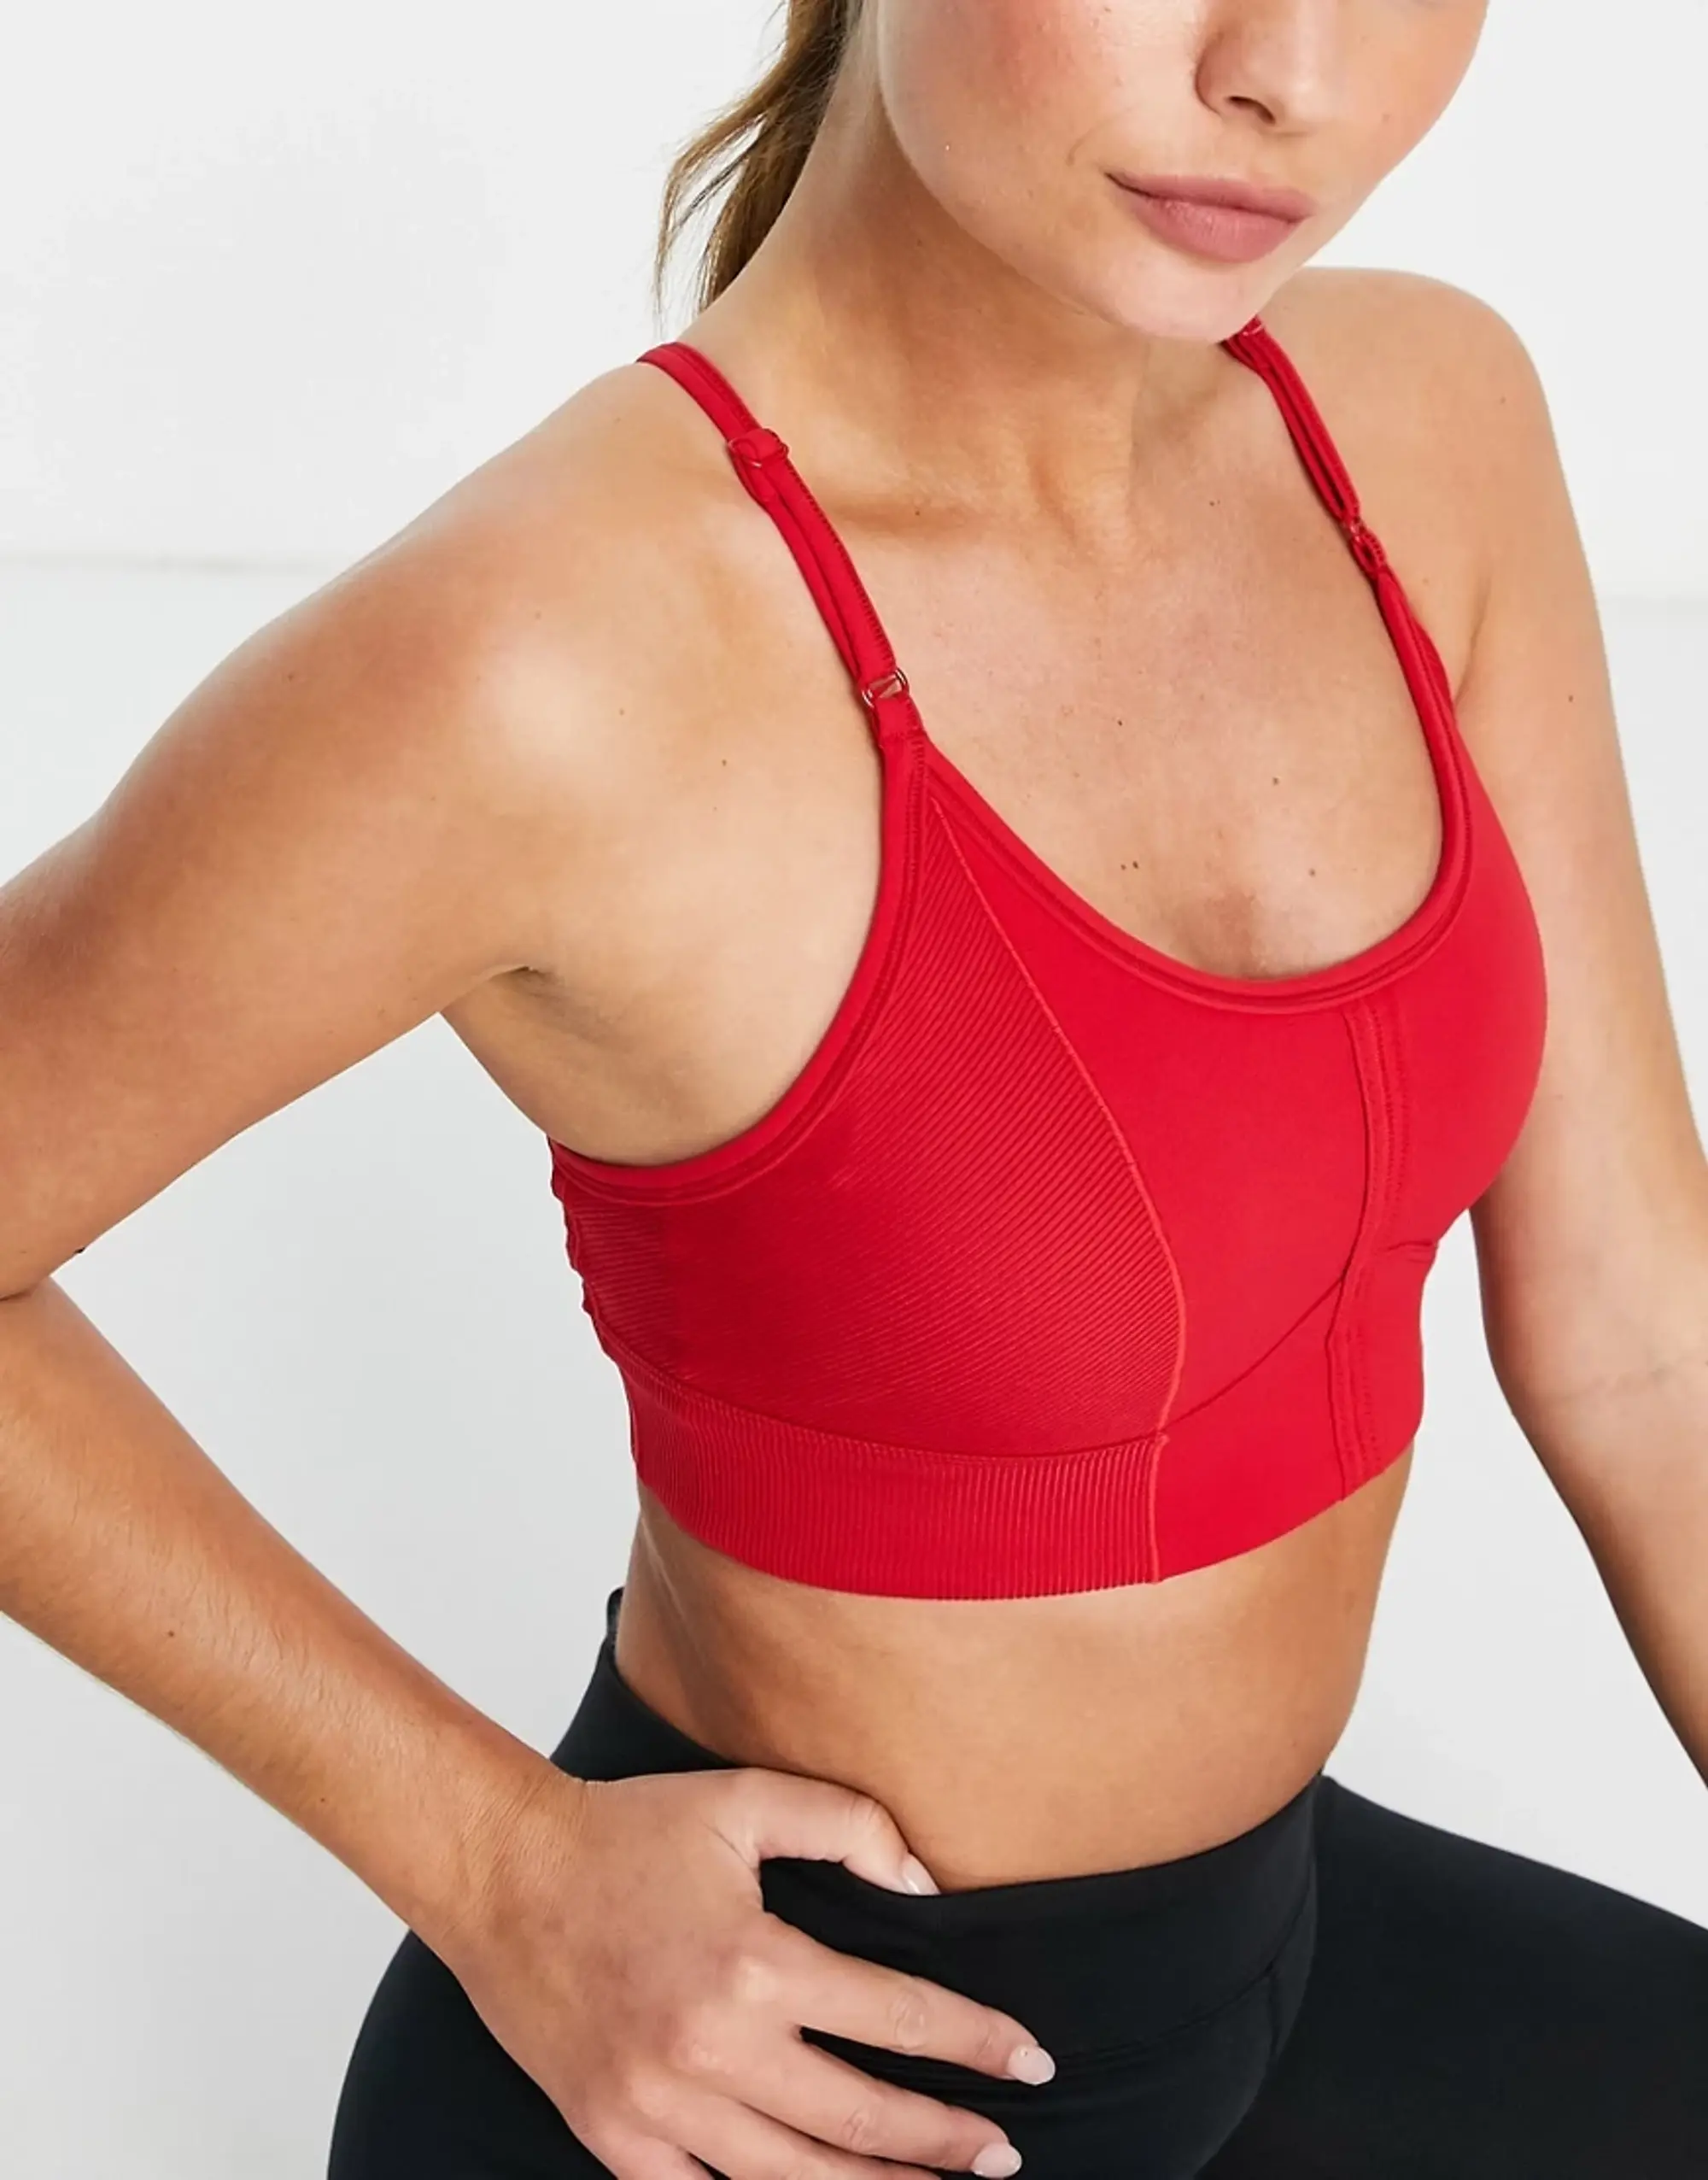 Nike Yoga Indy light support strappy sports bra in red, DD1183-687